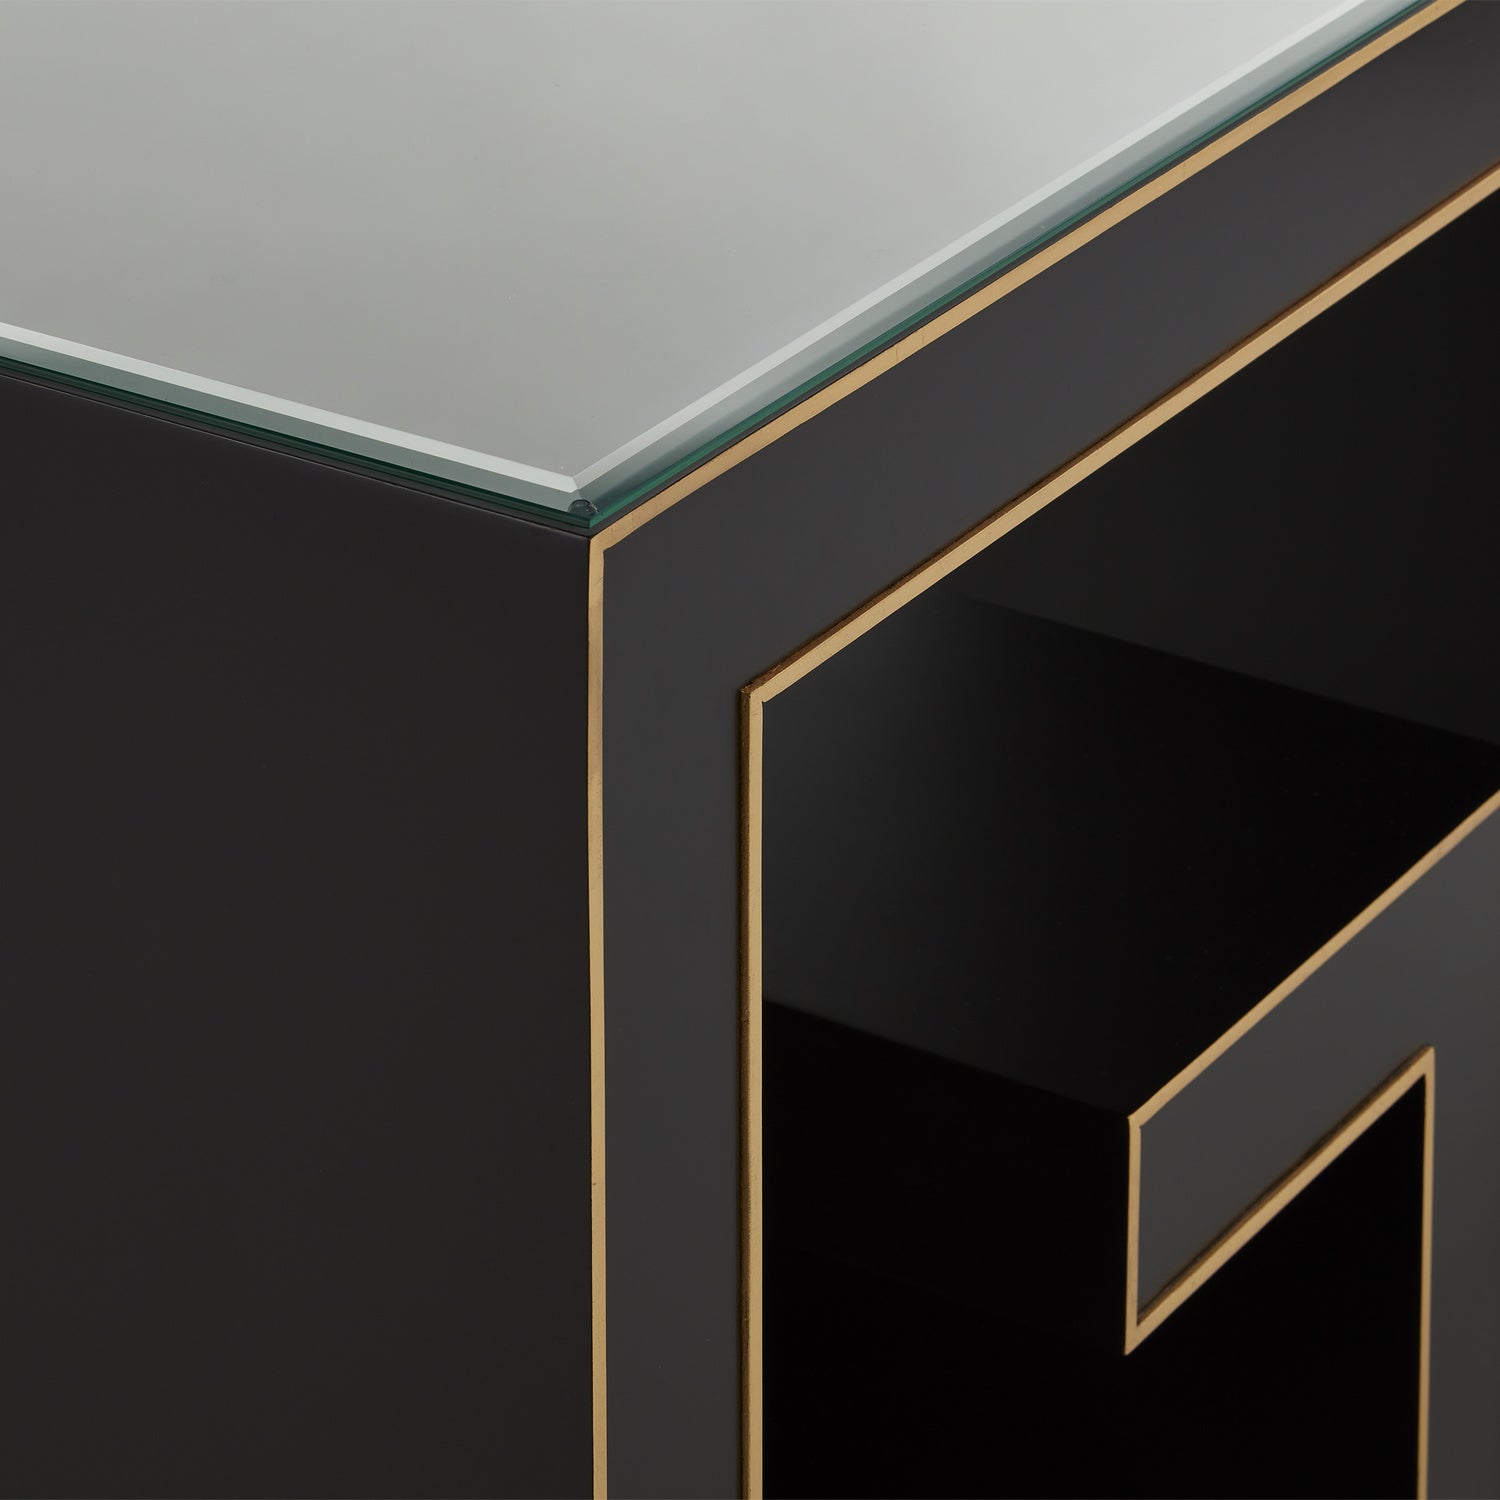 Writing Desk from the Barry Goralnick collection in Caviar Black/Gold finish